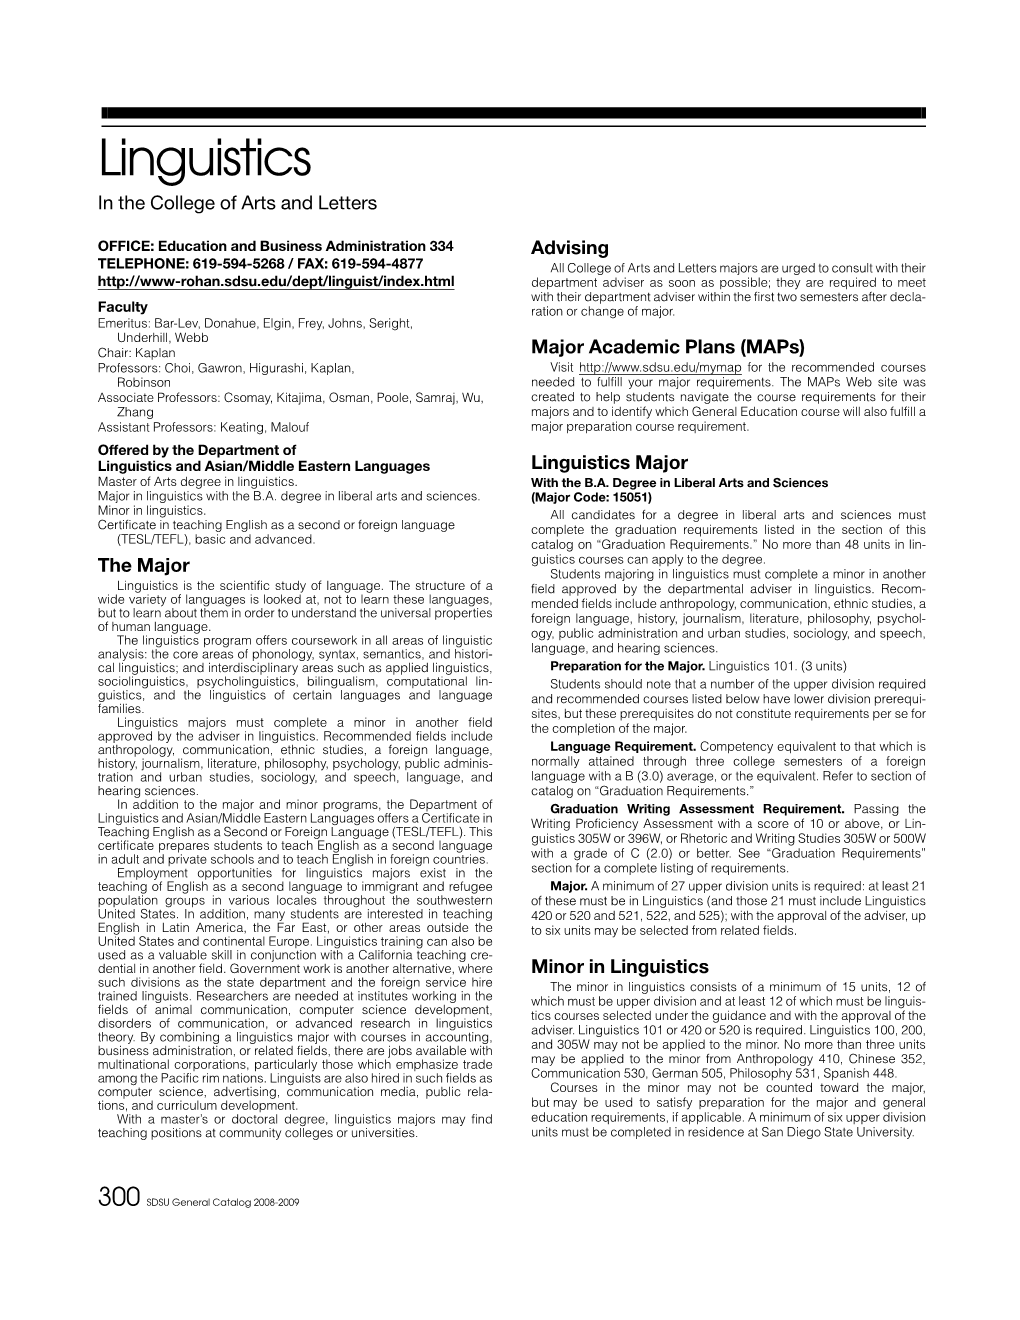 Linguistics in the College of Arts and Letters